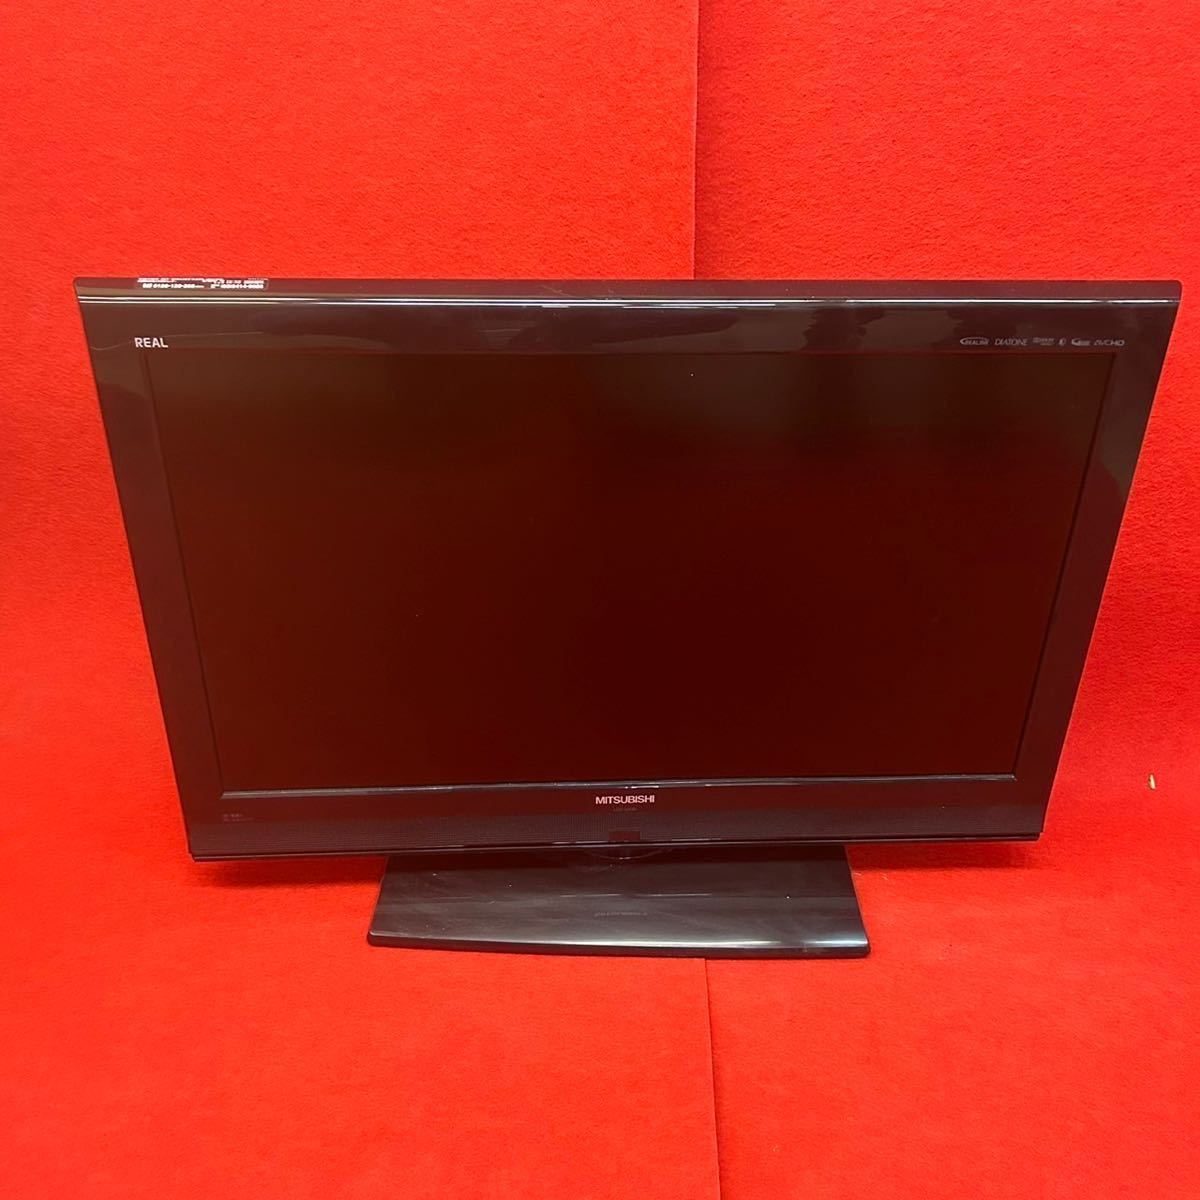 d202603 Mitsubishi MITSUBISHI liquid crystal color tv LCD-32CB1 100V 90W 50/60Hz 32 type consumer electronics junk present condition goods that time thing secondhand goods 